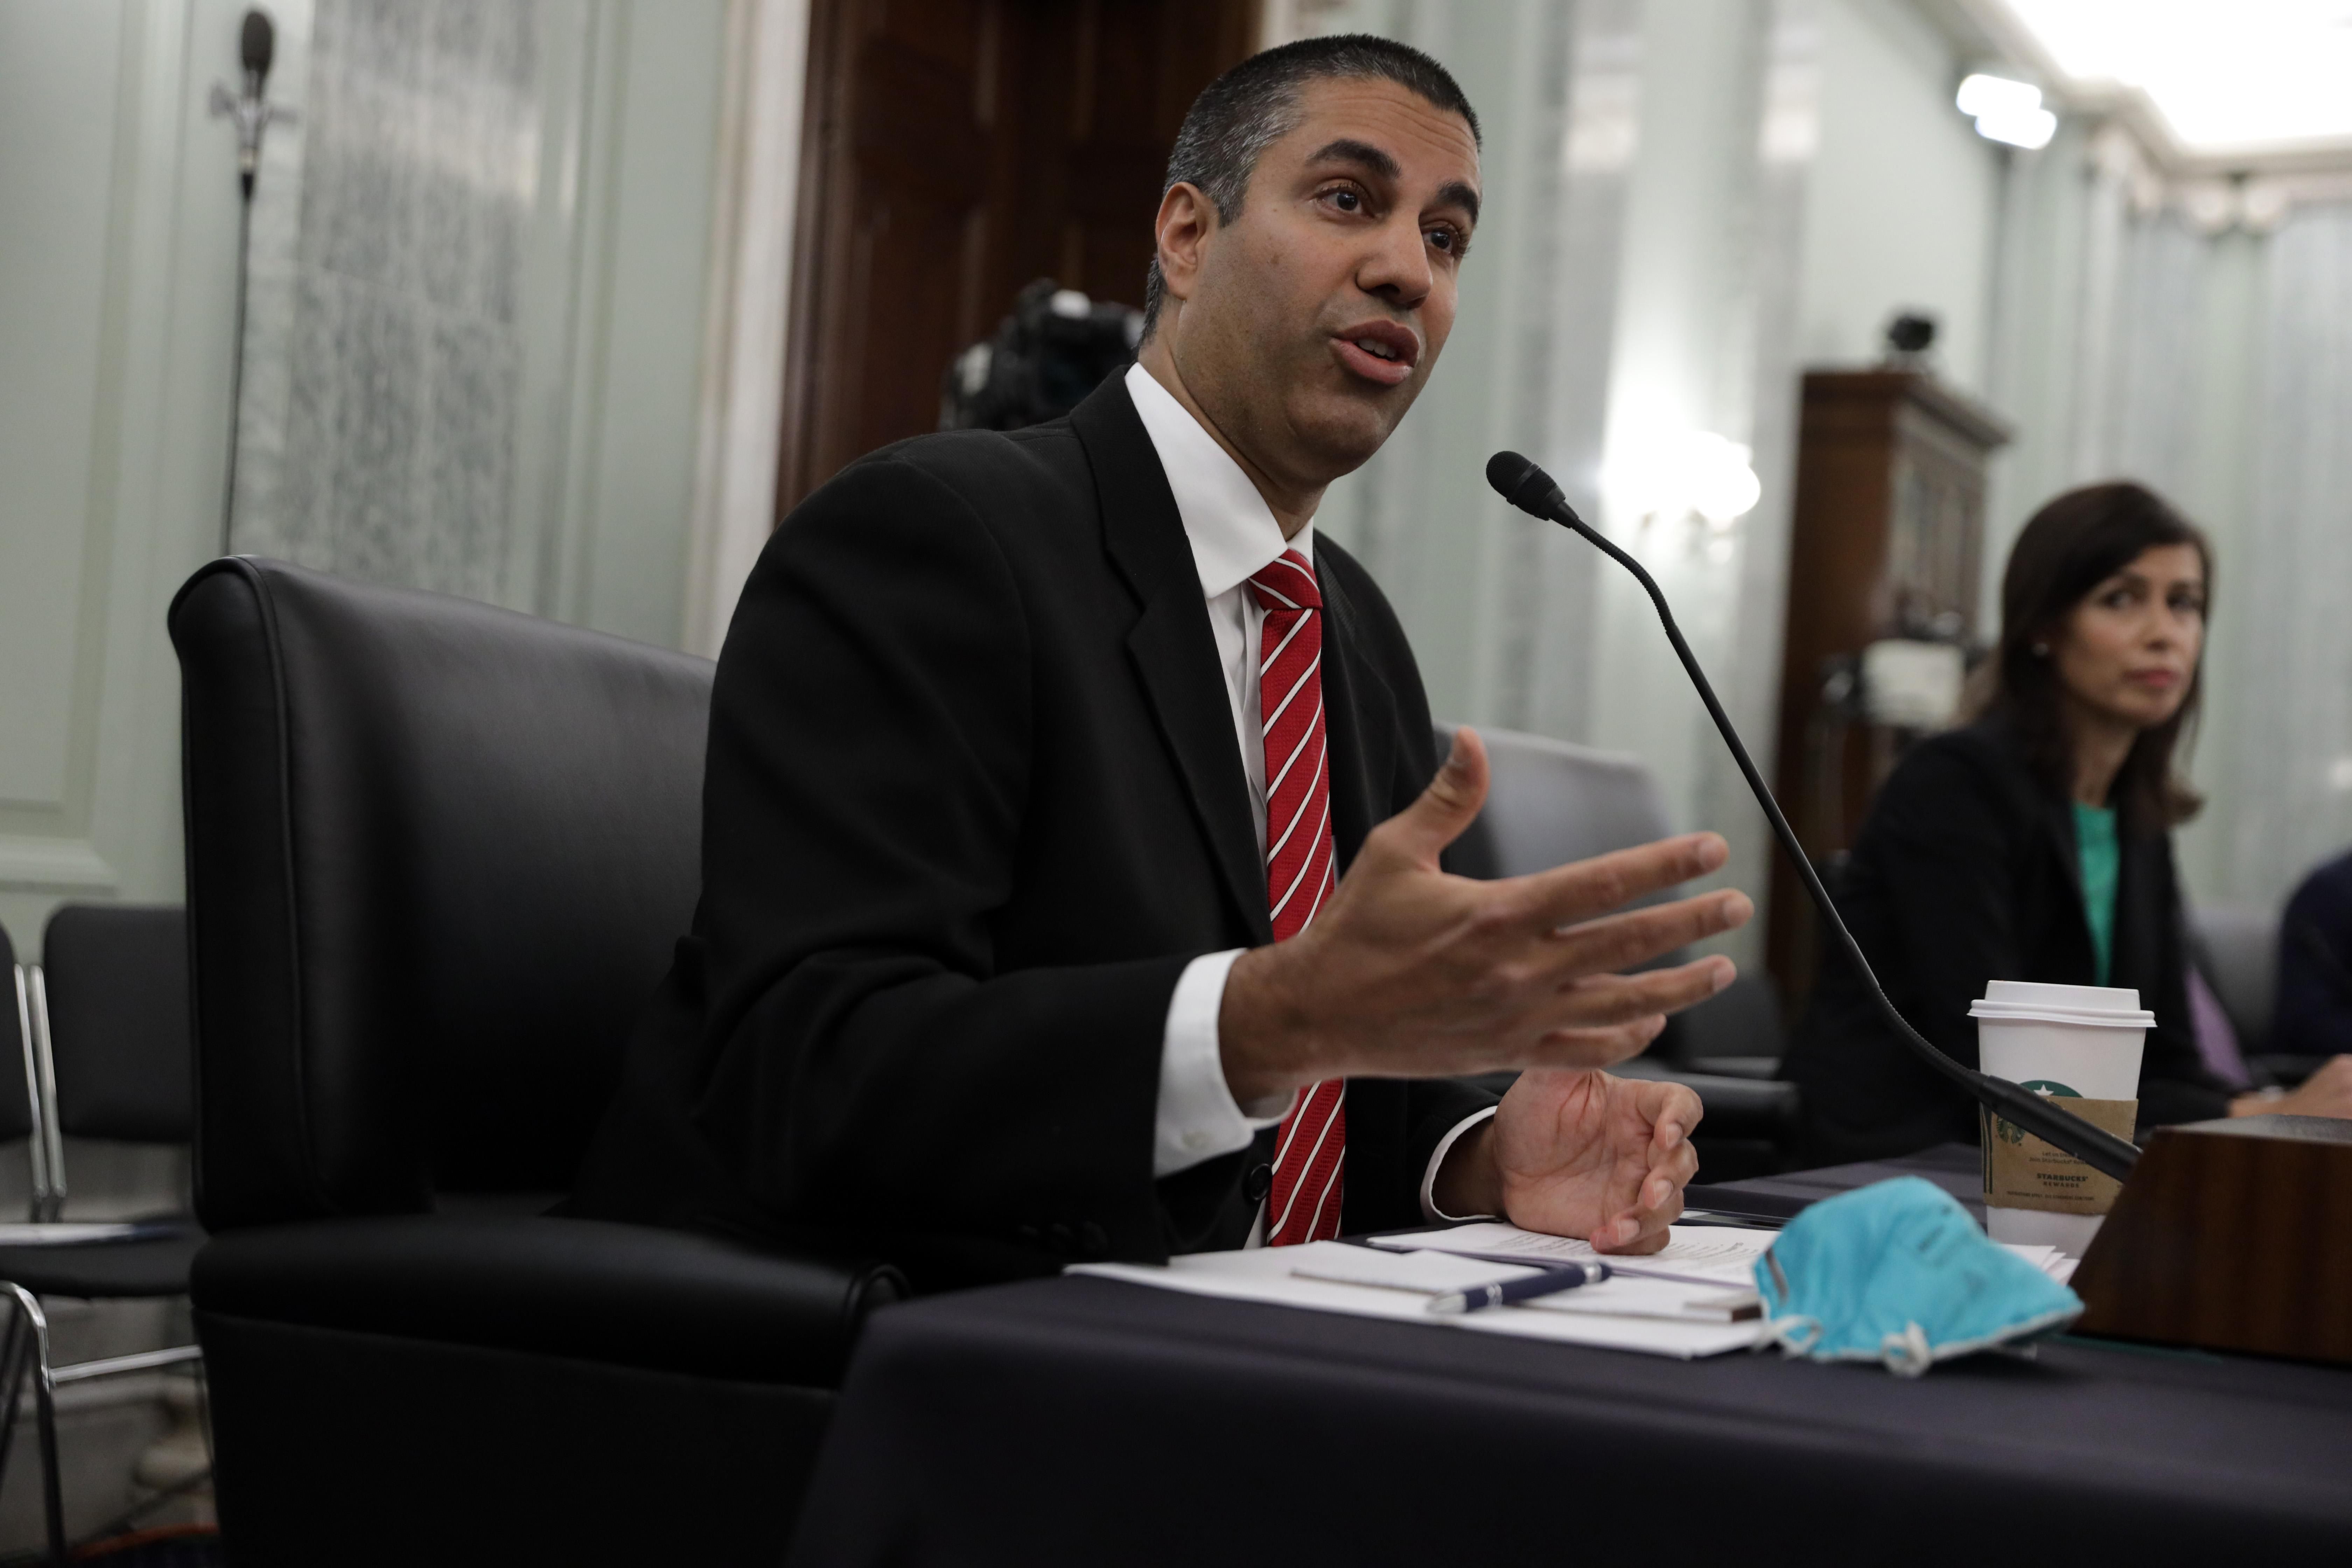 Federal Communications Commissioner Ajit Pai in 2020